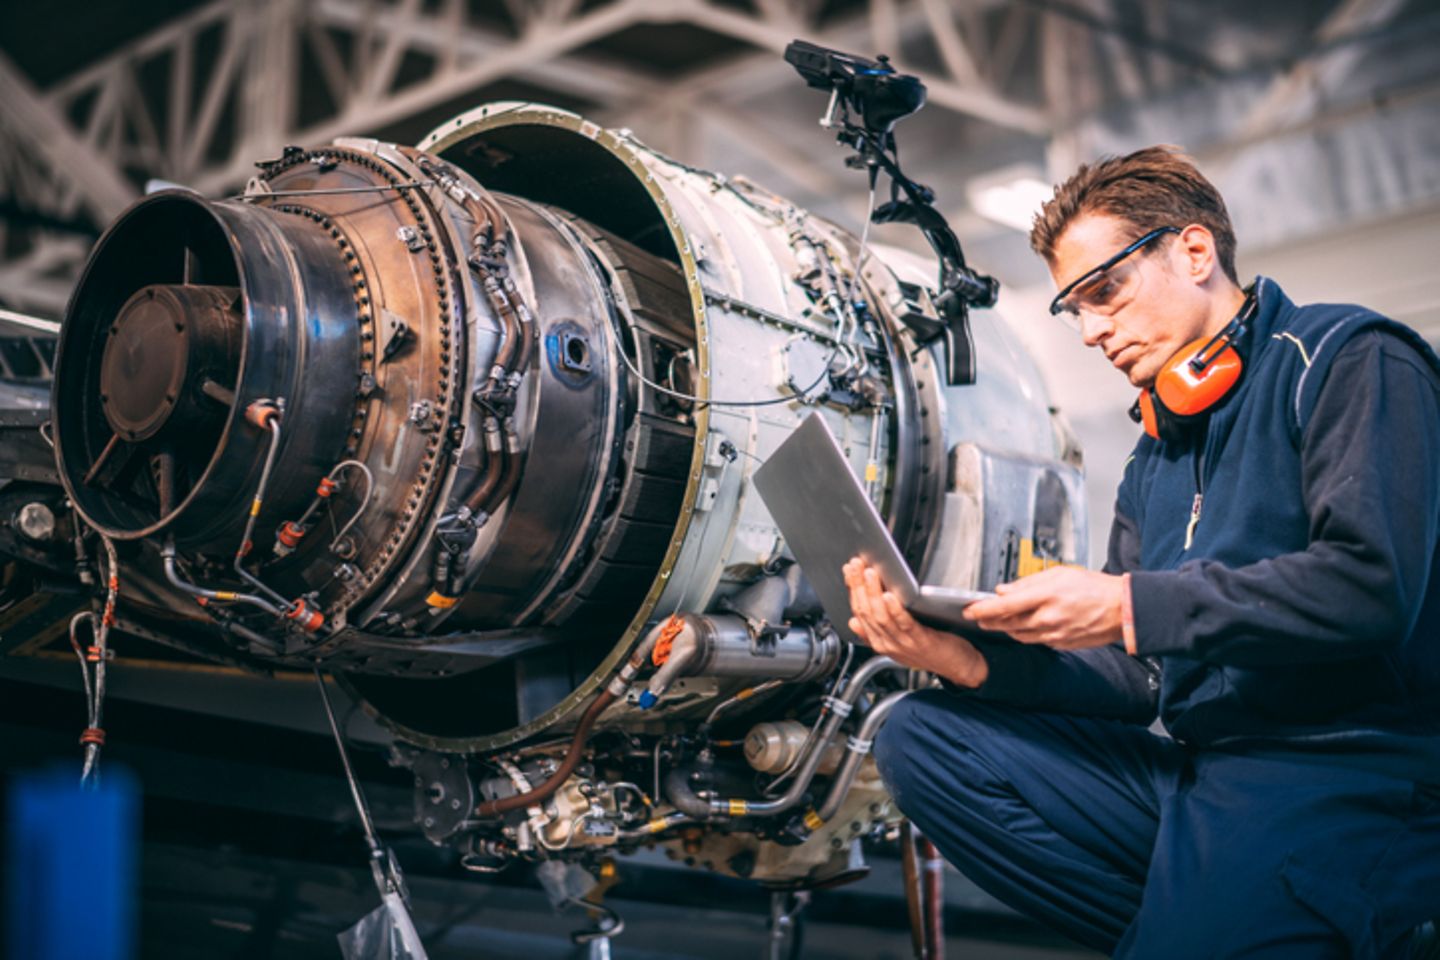 A man with a laptop in his hand kneels beside an aircraft engine.